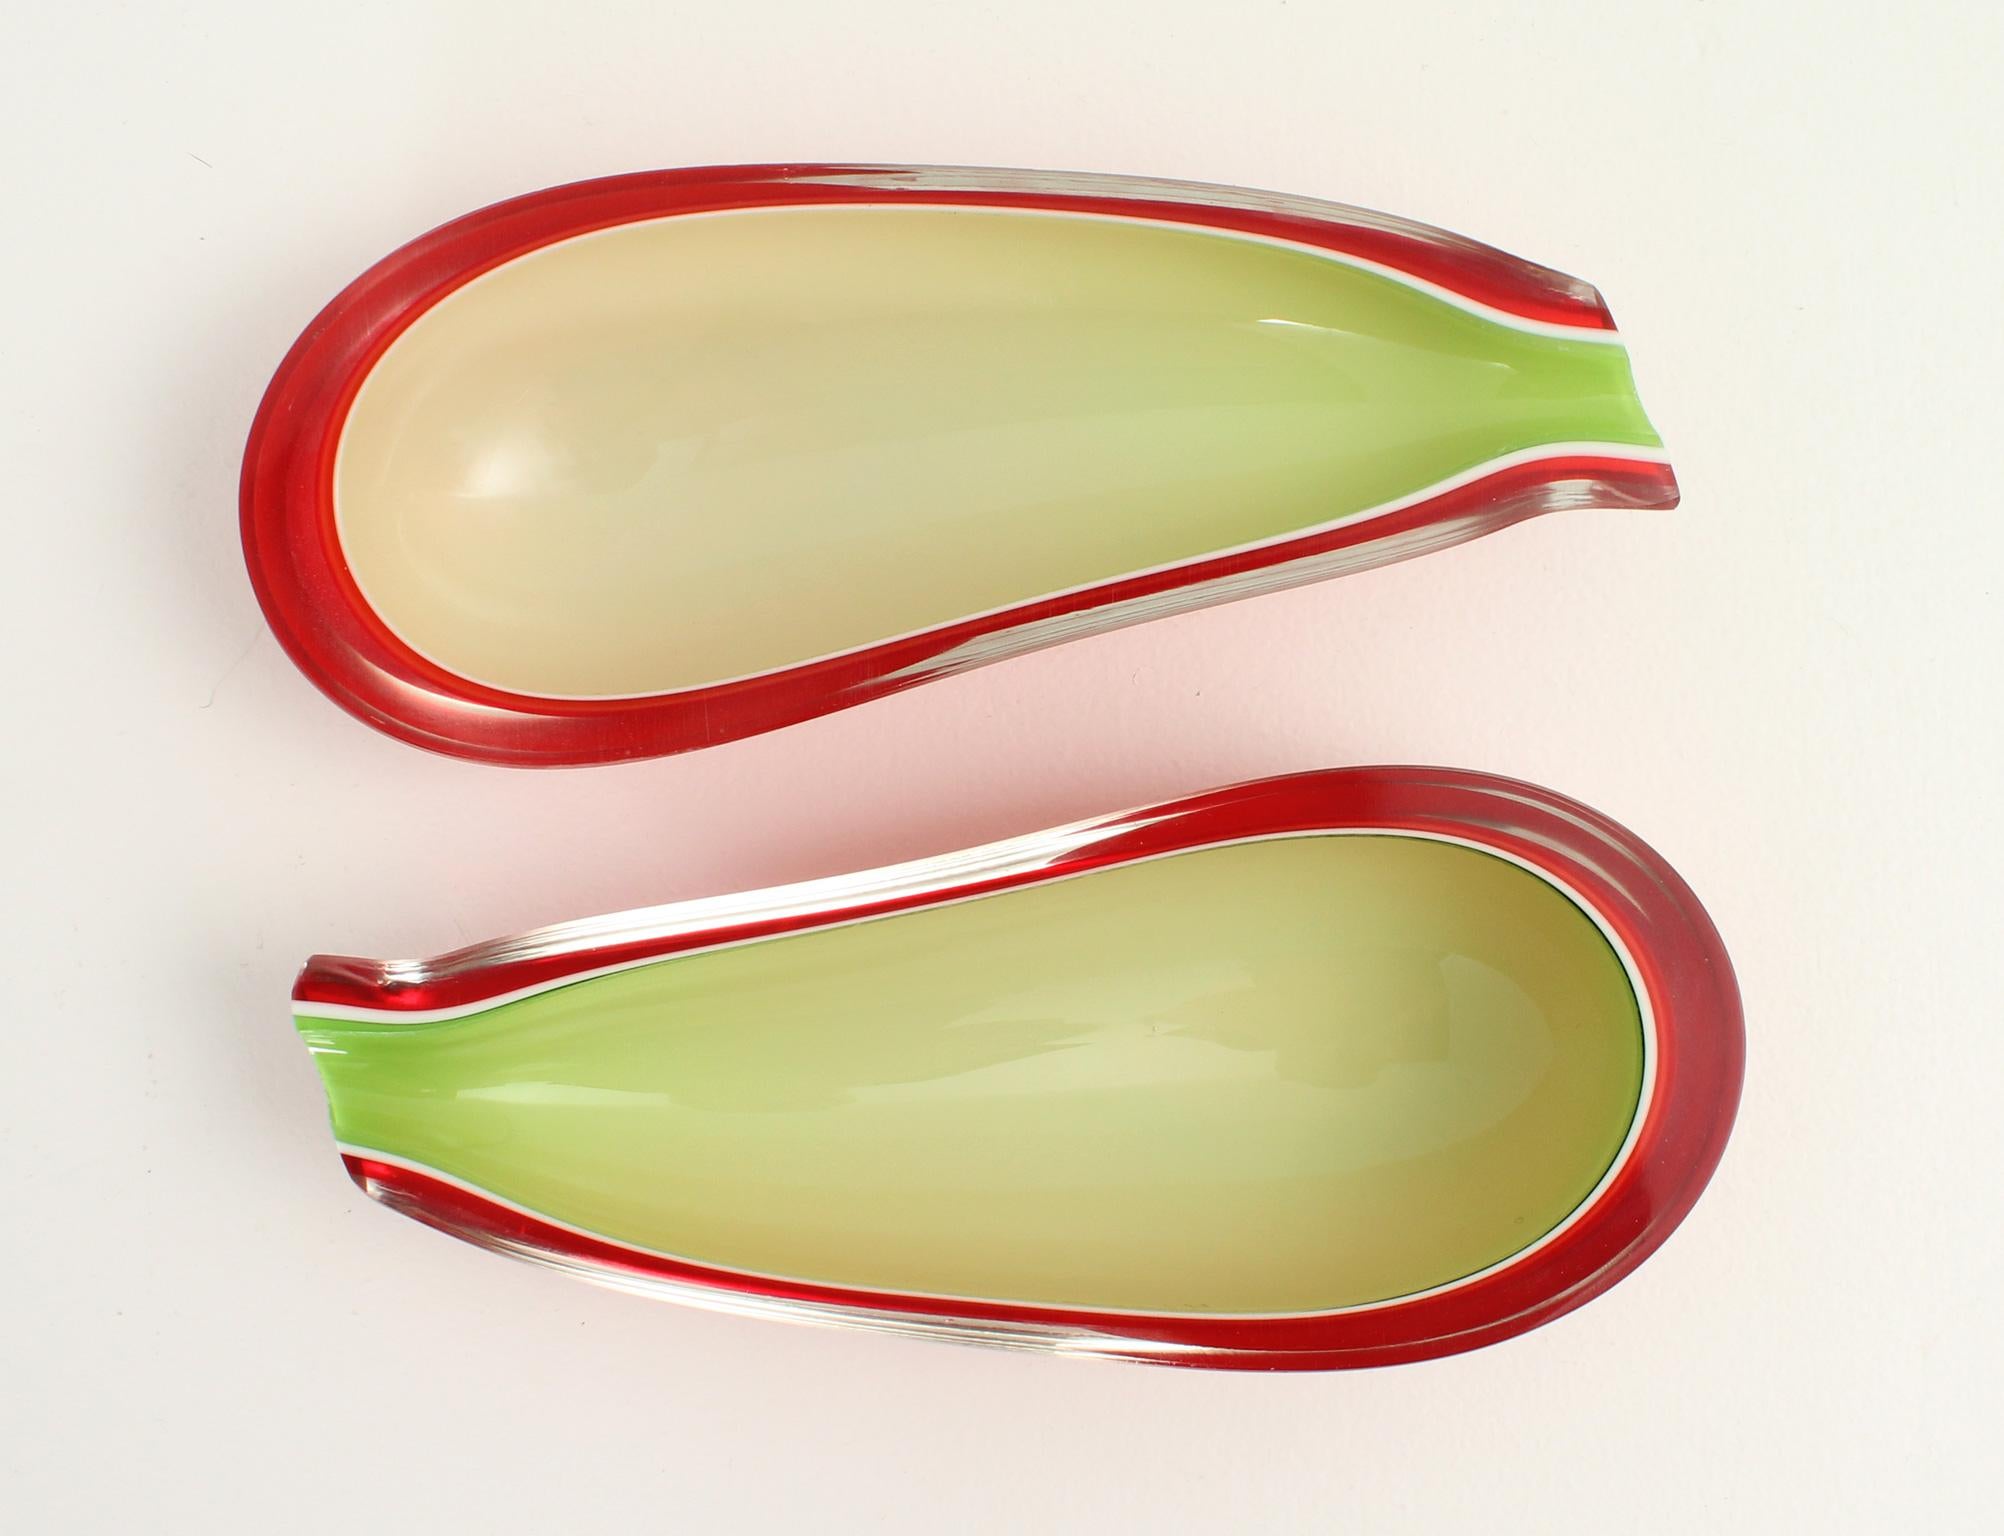 Nice pair of Fratelli Toso bowls or ashtrays with eggplant forms, Murano, Italy, 1950's. Hand blown glass with four layers of coloured and clear glass.